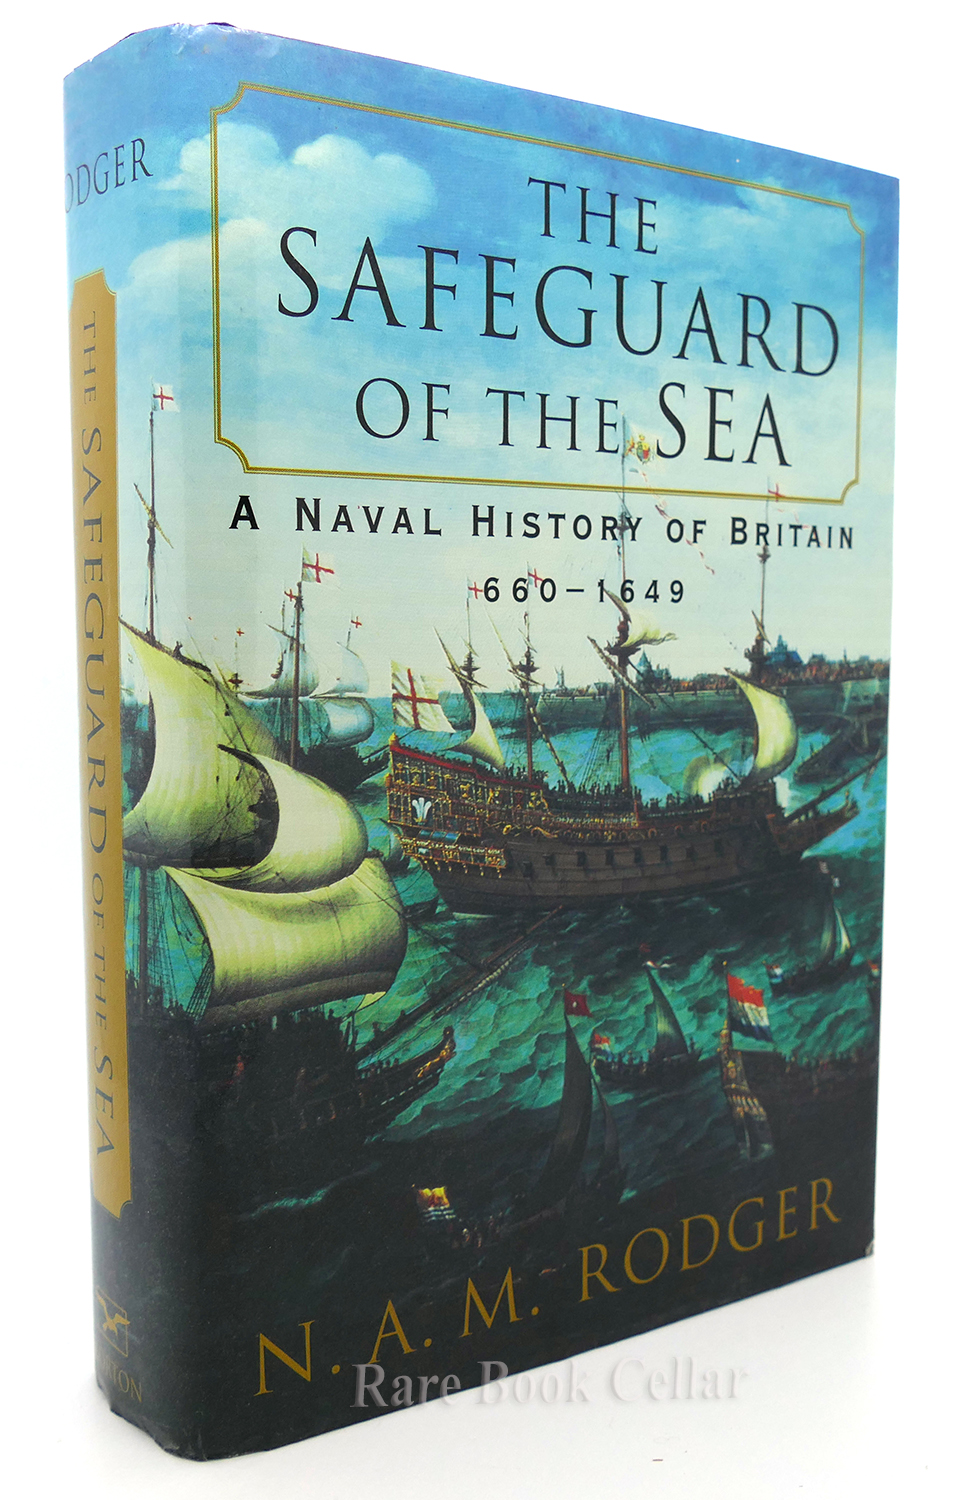 THE SAFEGUARD OF THE SEA A Naval History of Britain, 660-1649 - Rodger, N. A. M.